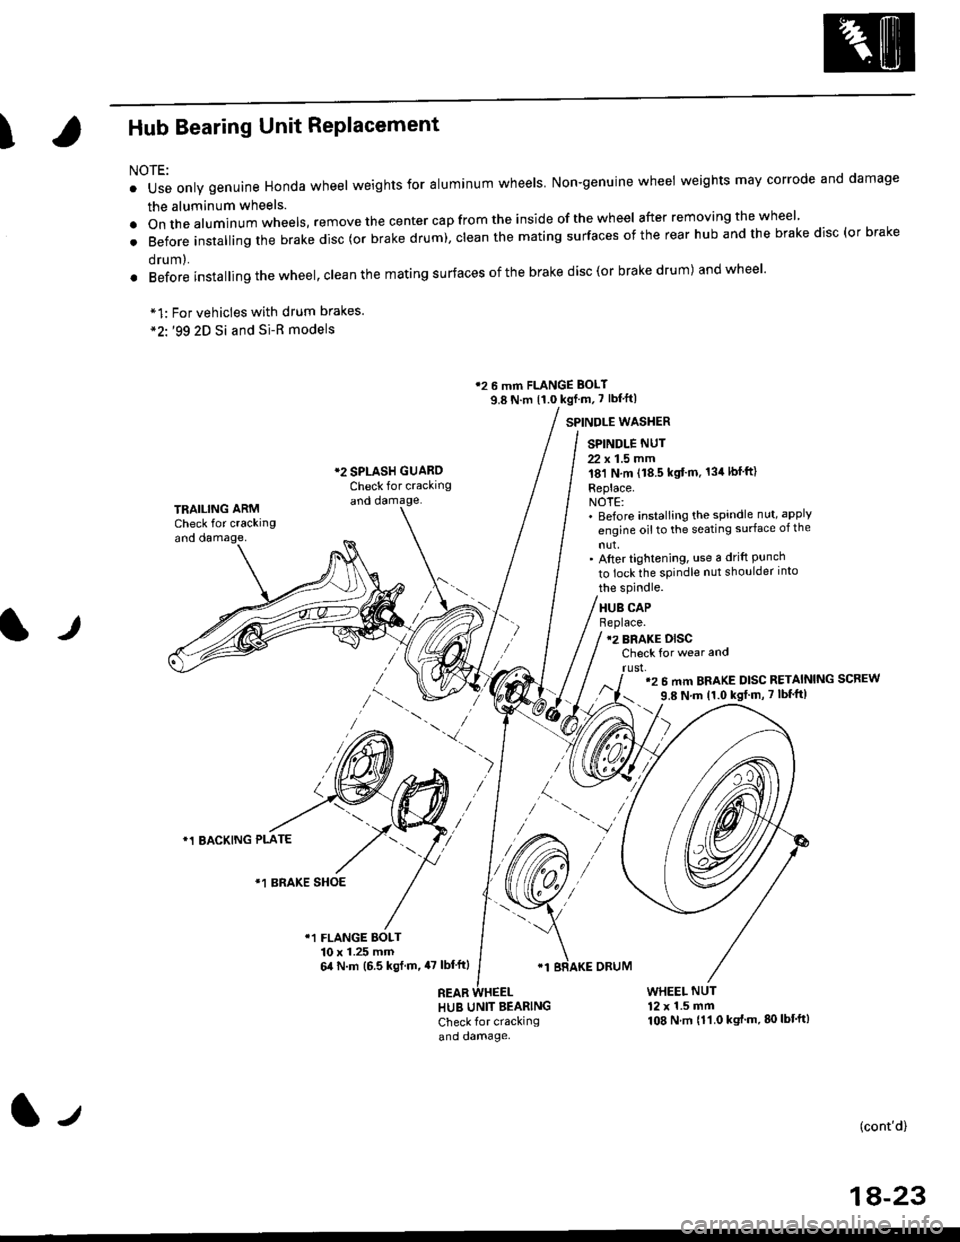 HONDA CIVIC 1997 6.G Workshop Manual IHub Bearing Unit RePlacement
For vehicles with drum brakes.99 2D Si and Si-B models
NOTE:
o Use only genuine Honda wheel weights for aluminum wheels Non-genuine wheel weights may corrode and damage
